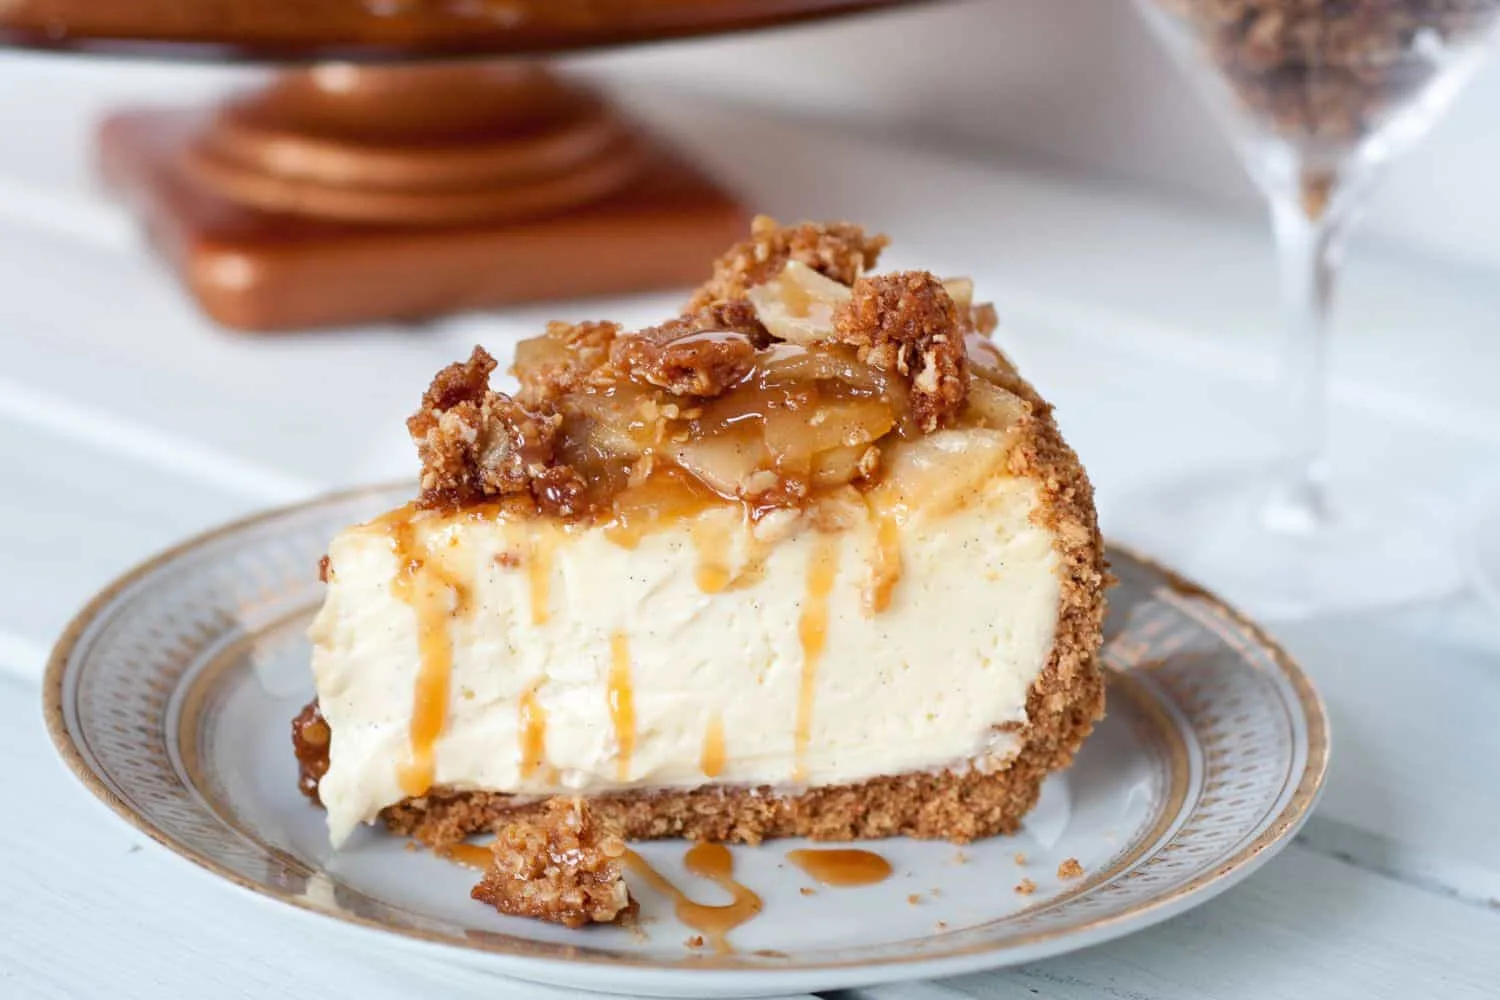 Caramel Apple Cheesecake - A creamy vanilla bean cheesecake on a cinnamon graham crust topped with a homemade apple pie filling, a crunchy streusel topping, and liberally drizzled with caramel sauce! Get the recipe on GoodieGodmother.com